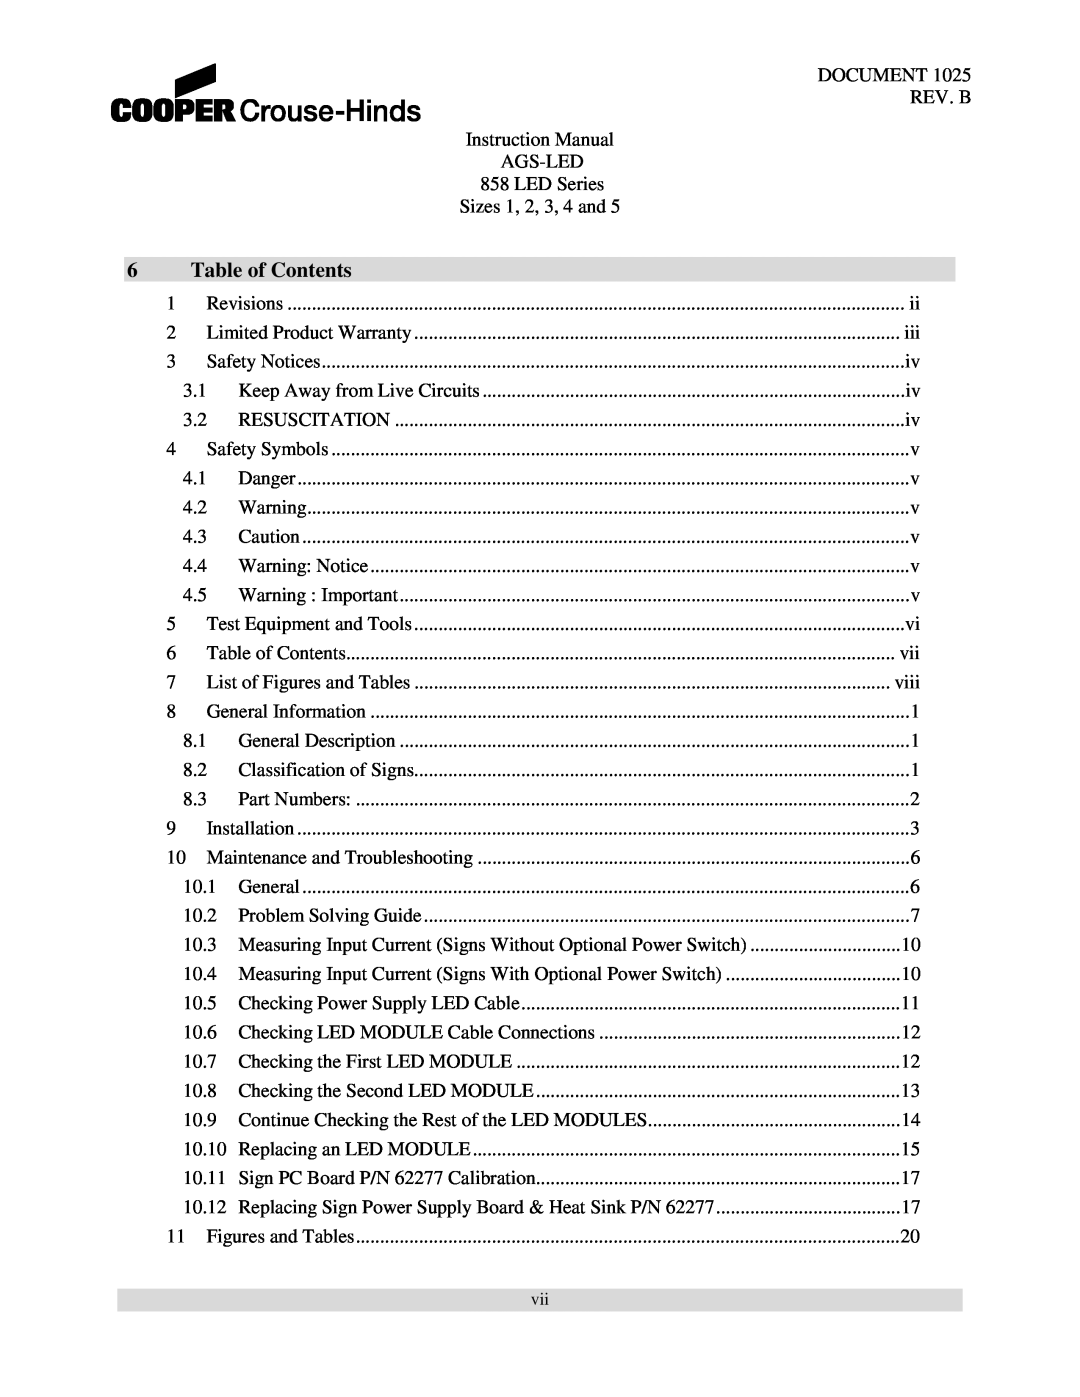 Cooper Bussmann 858 instruction manual 6Table of Contents 